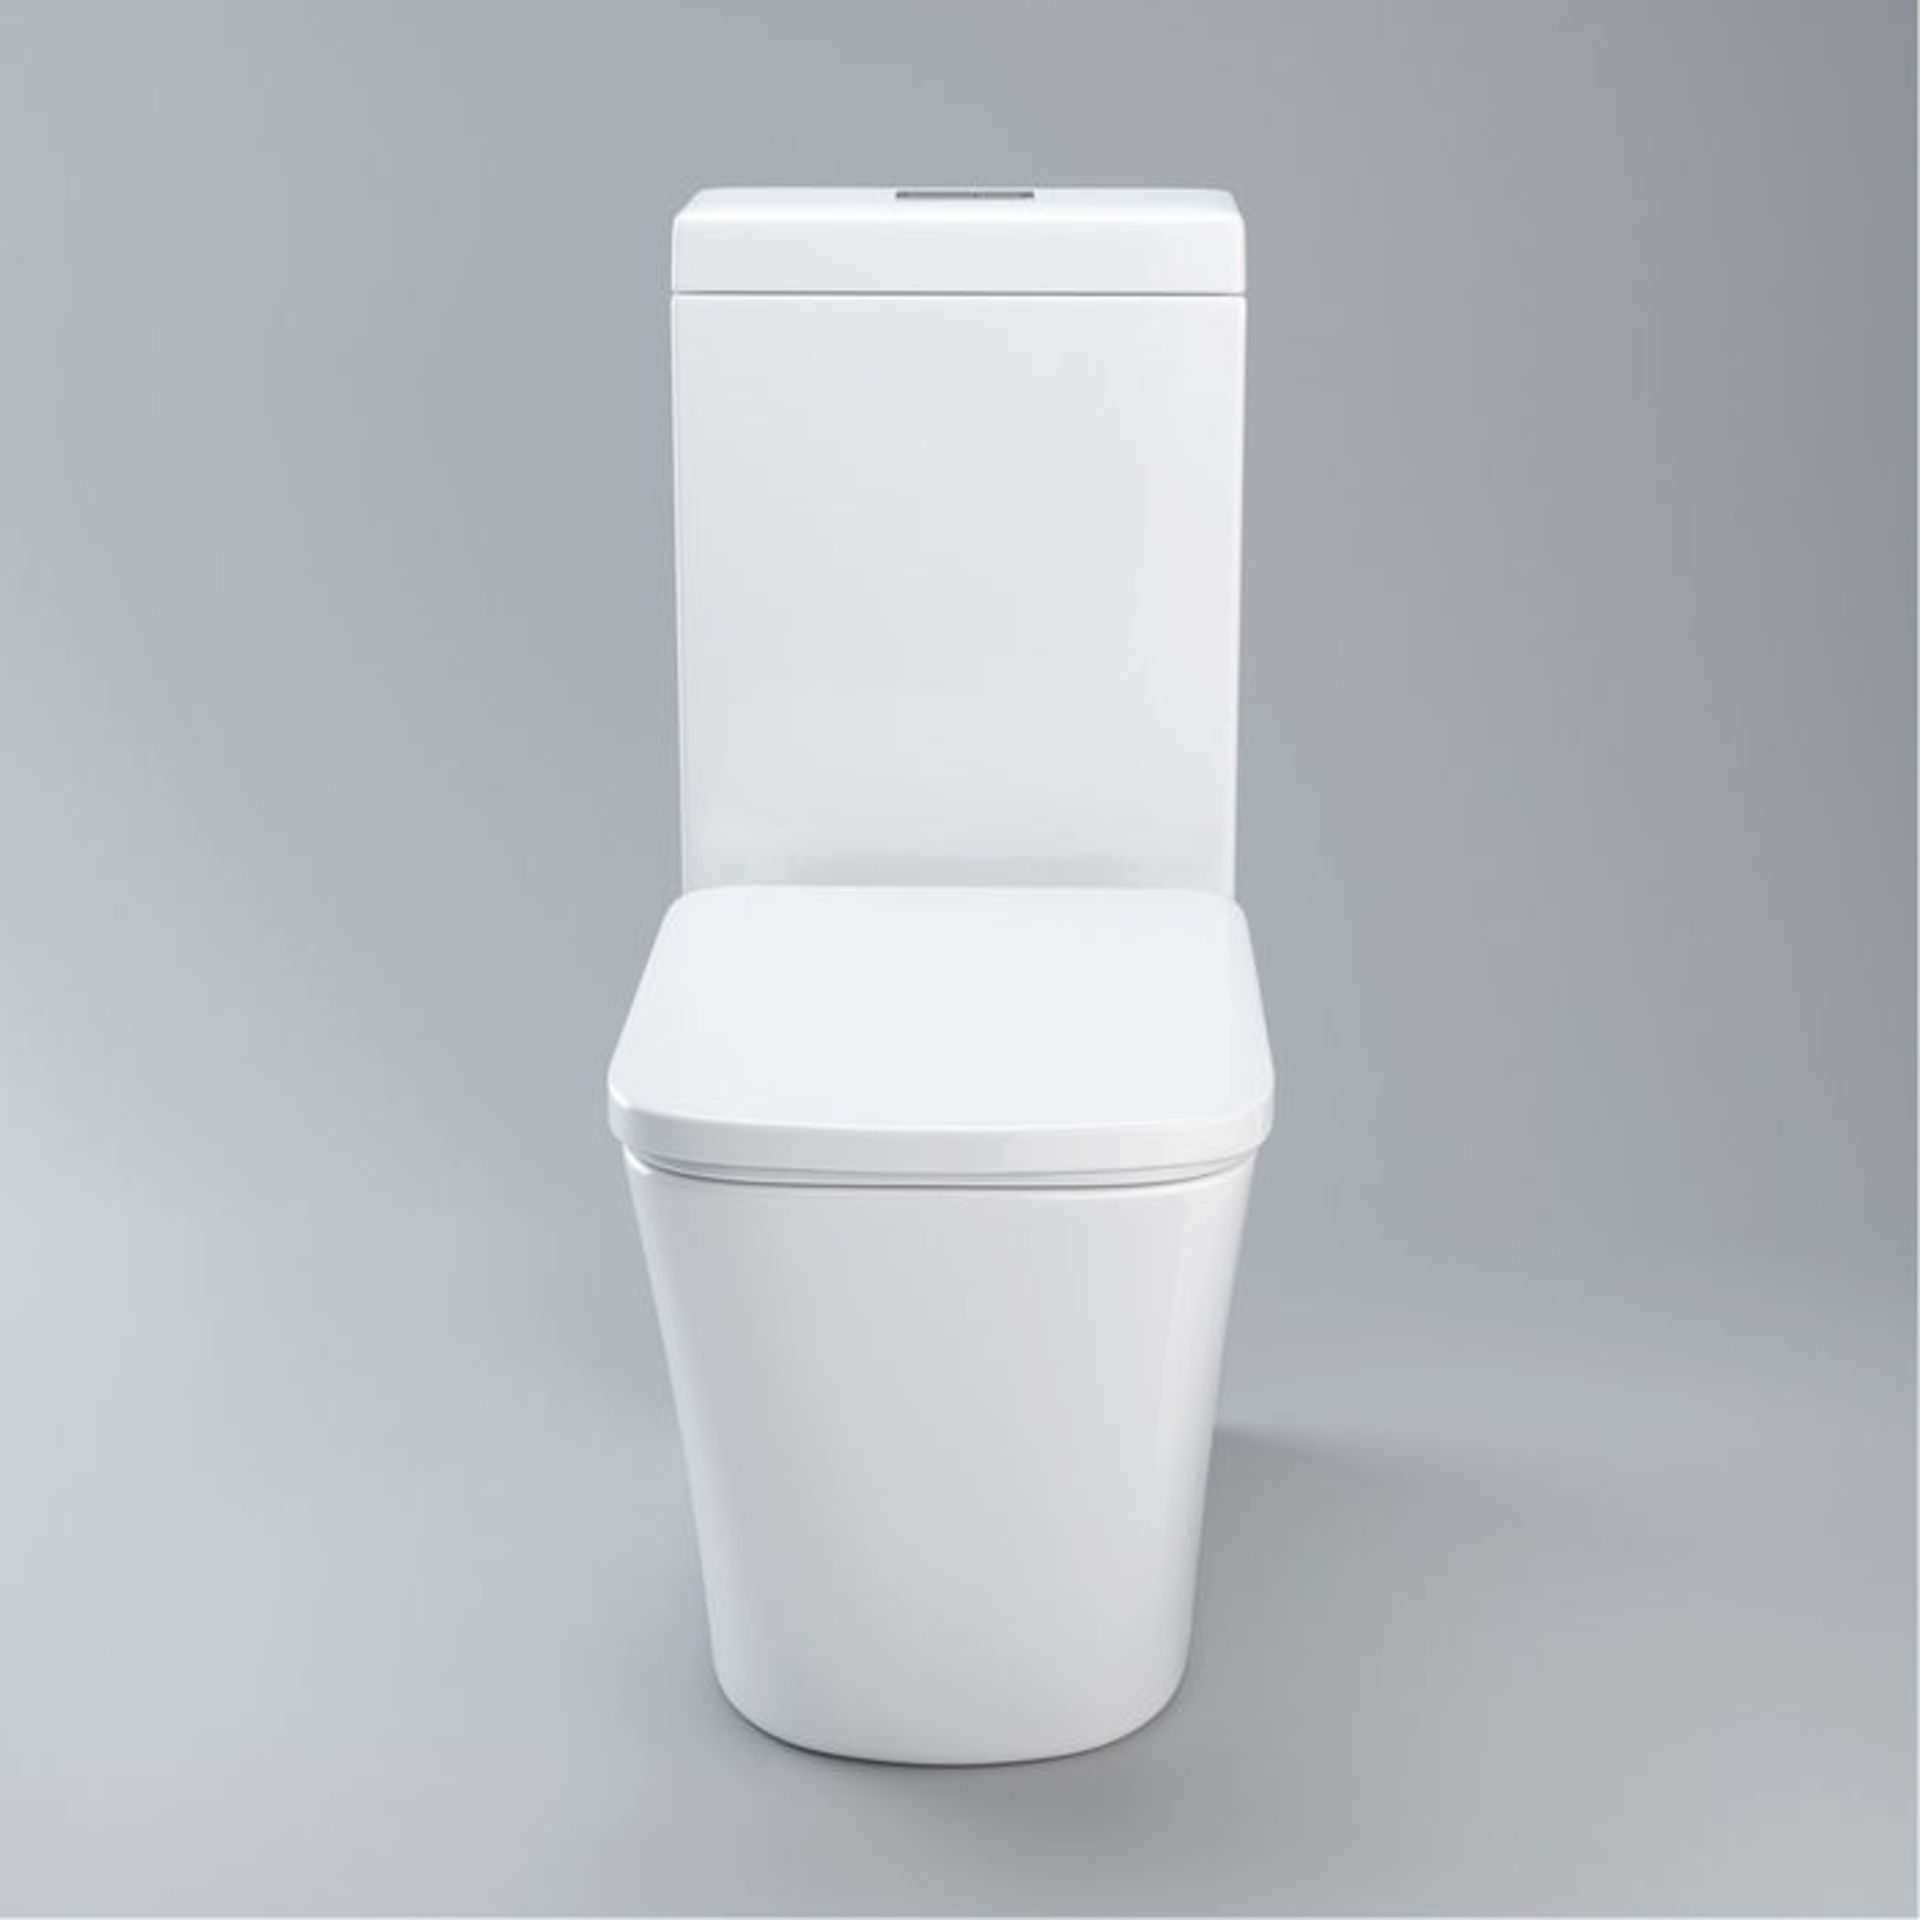 (P254) Florence Close Coupled Toilet & Cistern inc Soft Close Seat. Contemporary design finished - Image 5 of 5